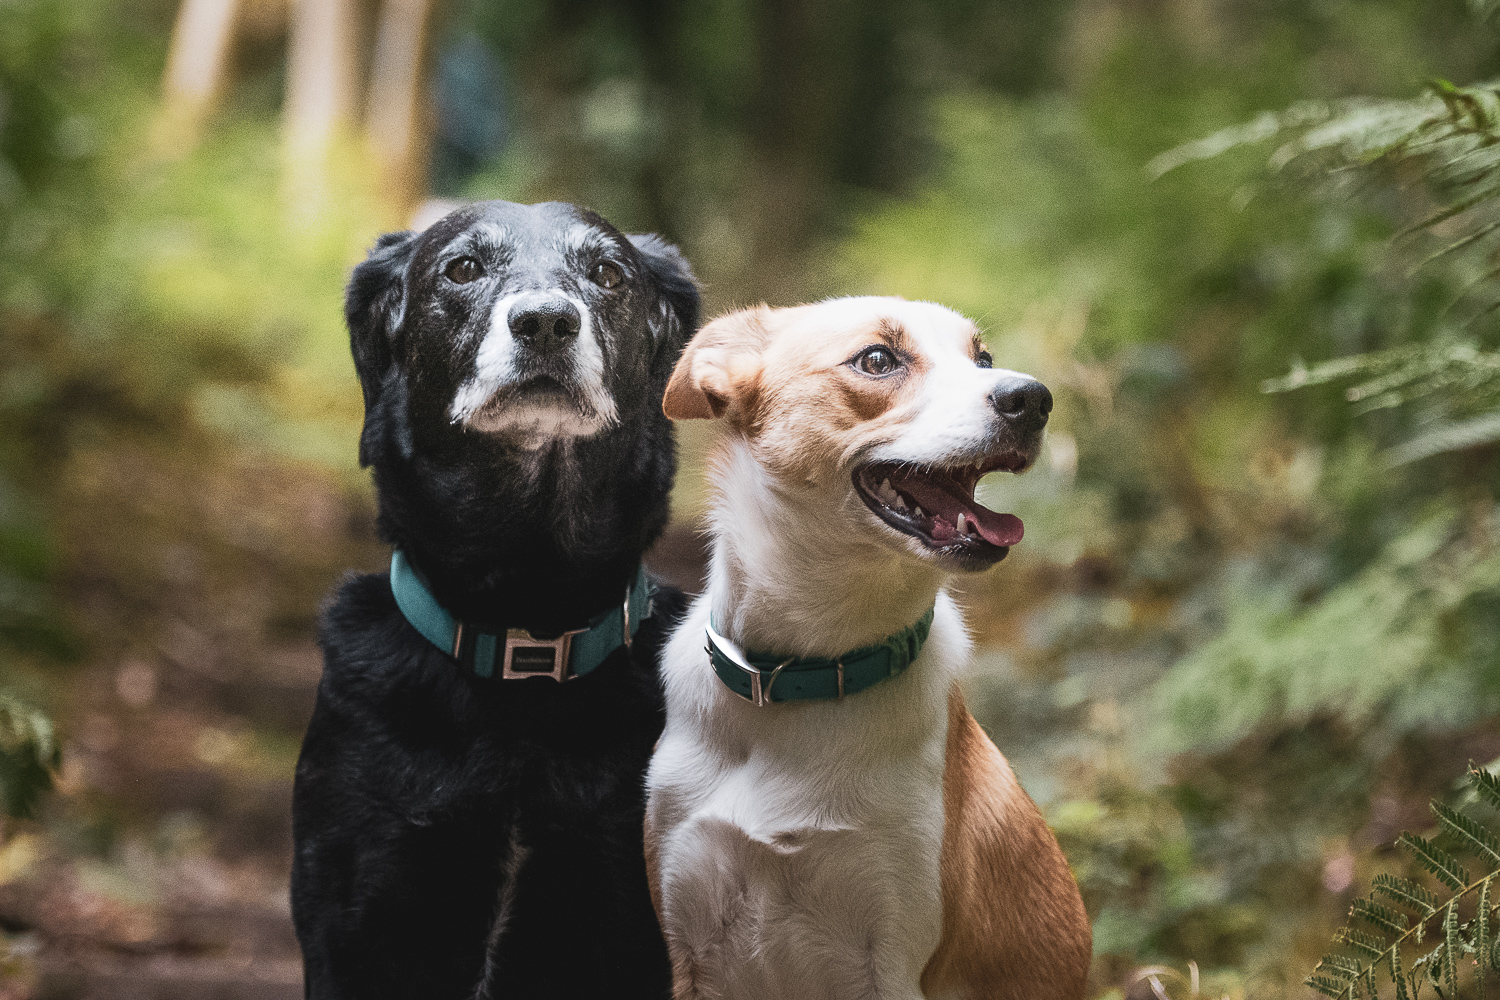 Dogs in woodland photograph